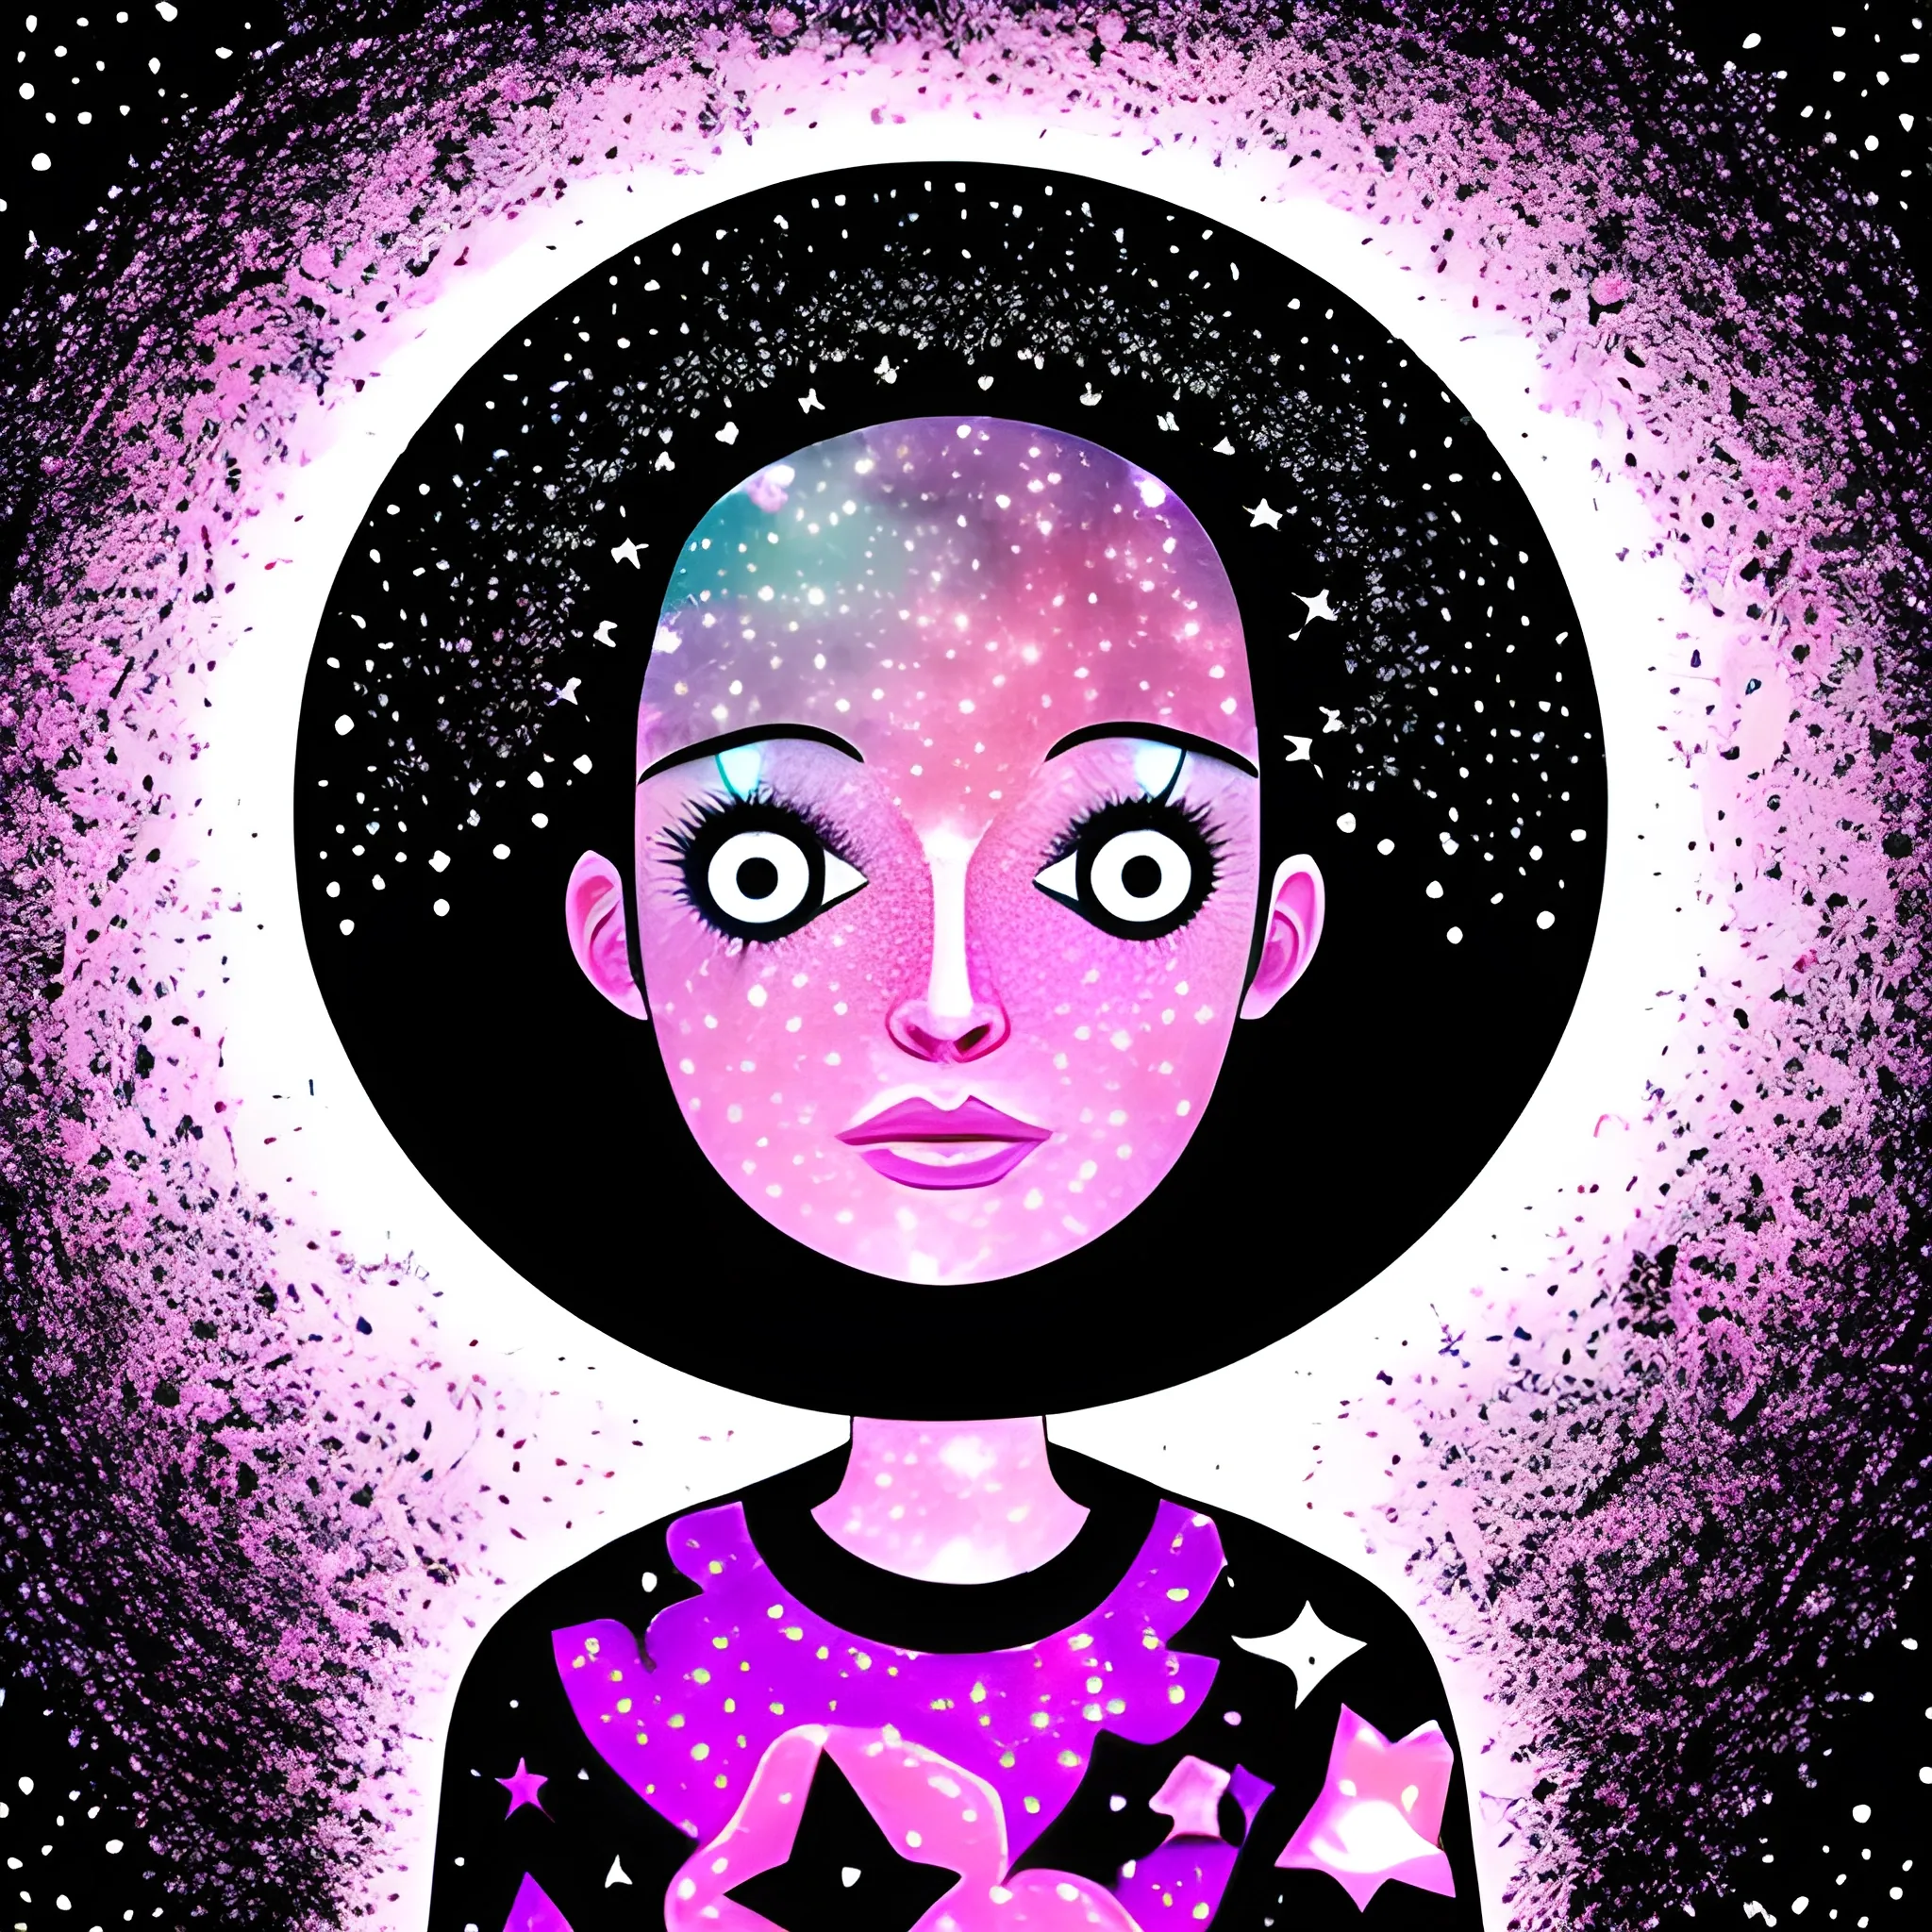 the night starry sky inside us, Trippy, Cartoon. Pink and black colors